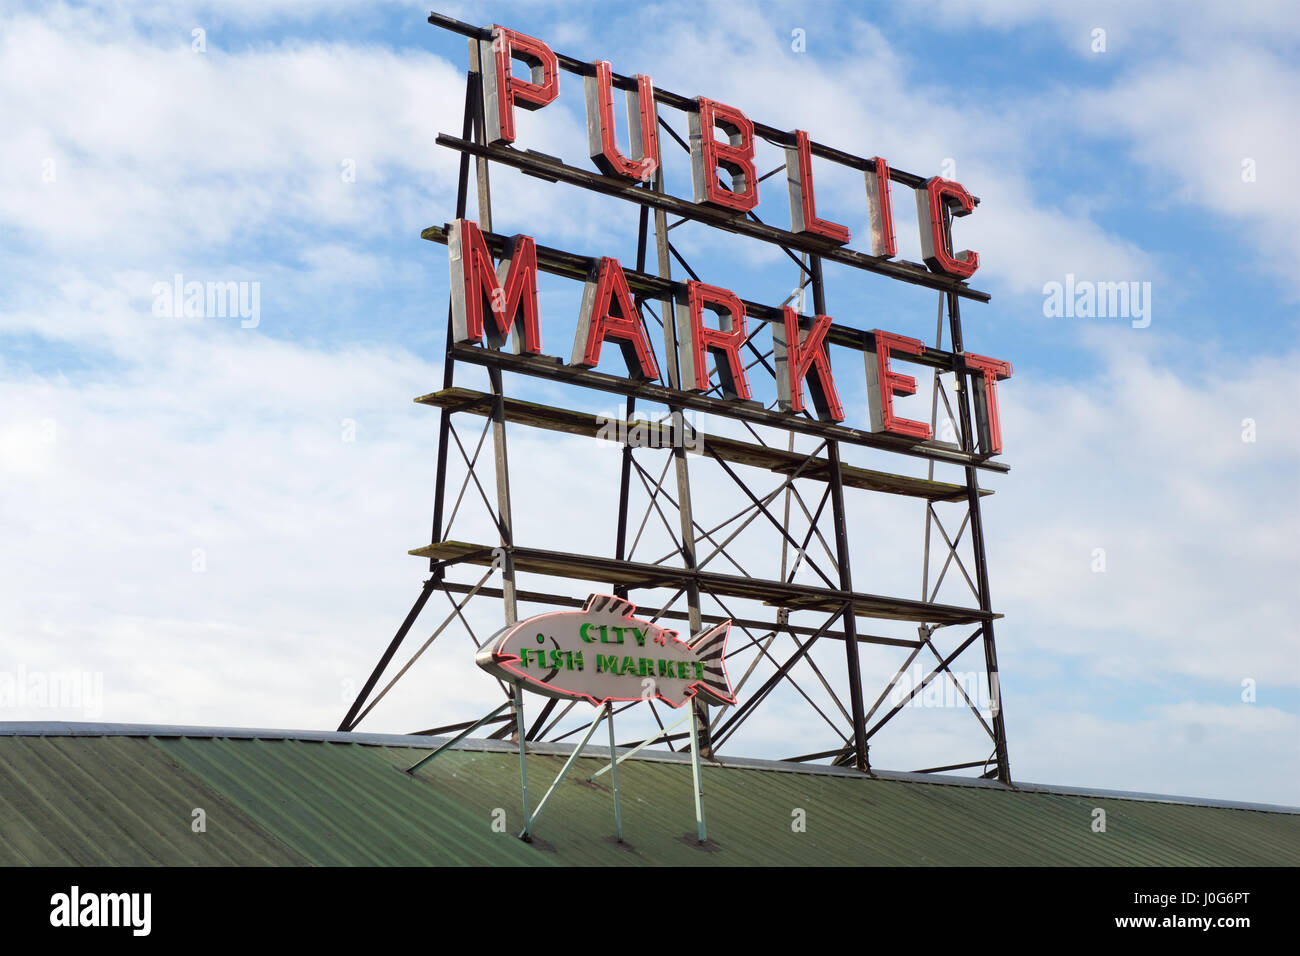 SEATTLE, WASHINGTON, USA - JAN 24th, 2017: Neon public market sign against cloudy sky, Pikes Place Market in downtown is a famous sight. Stock Photo